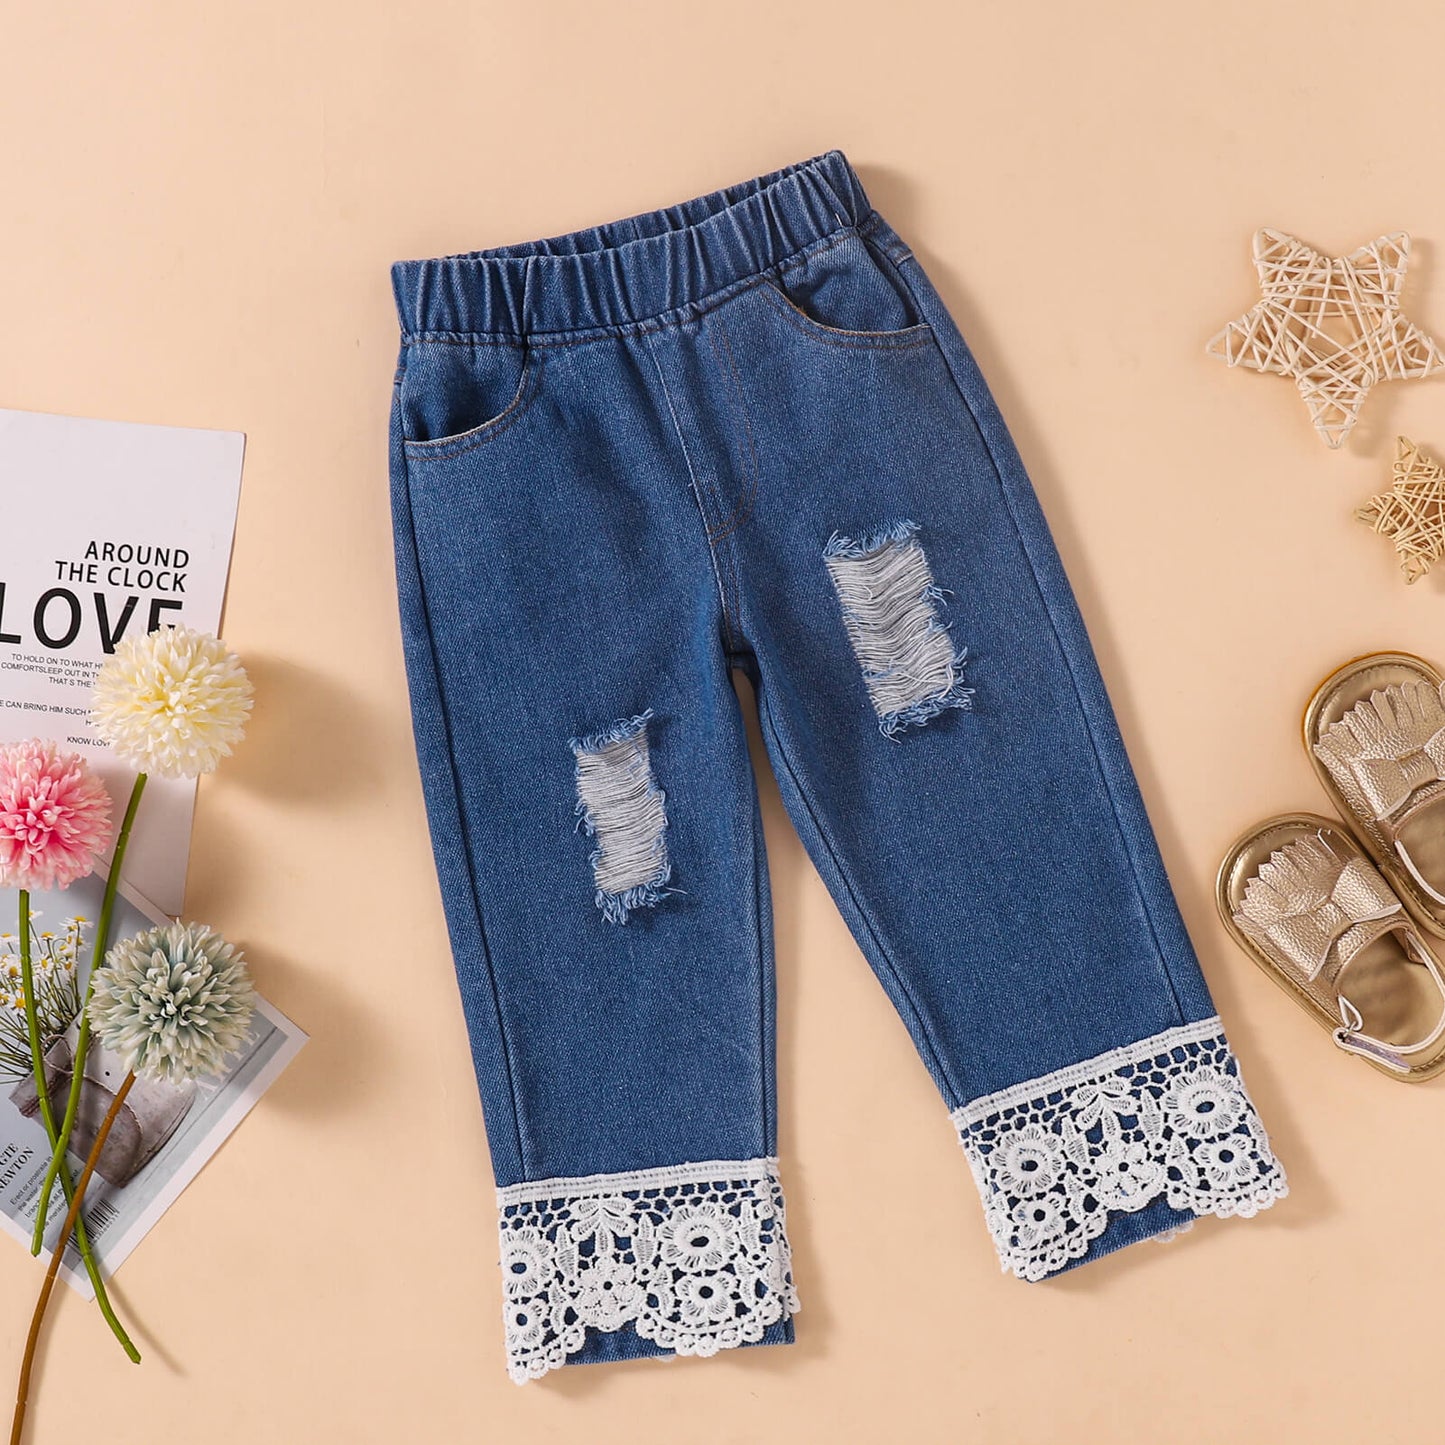 Girls Floral Top and Lace Trim Jeans Set